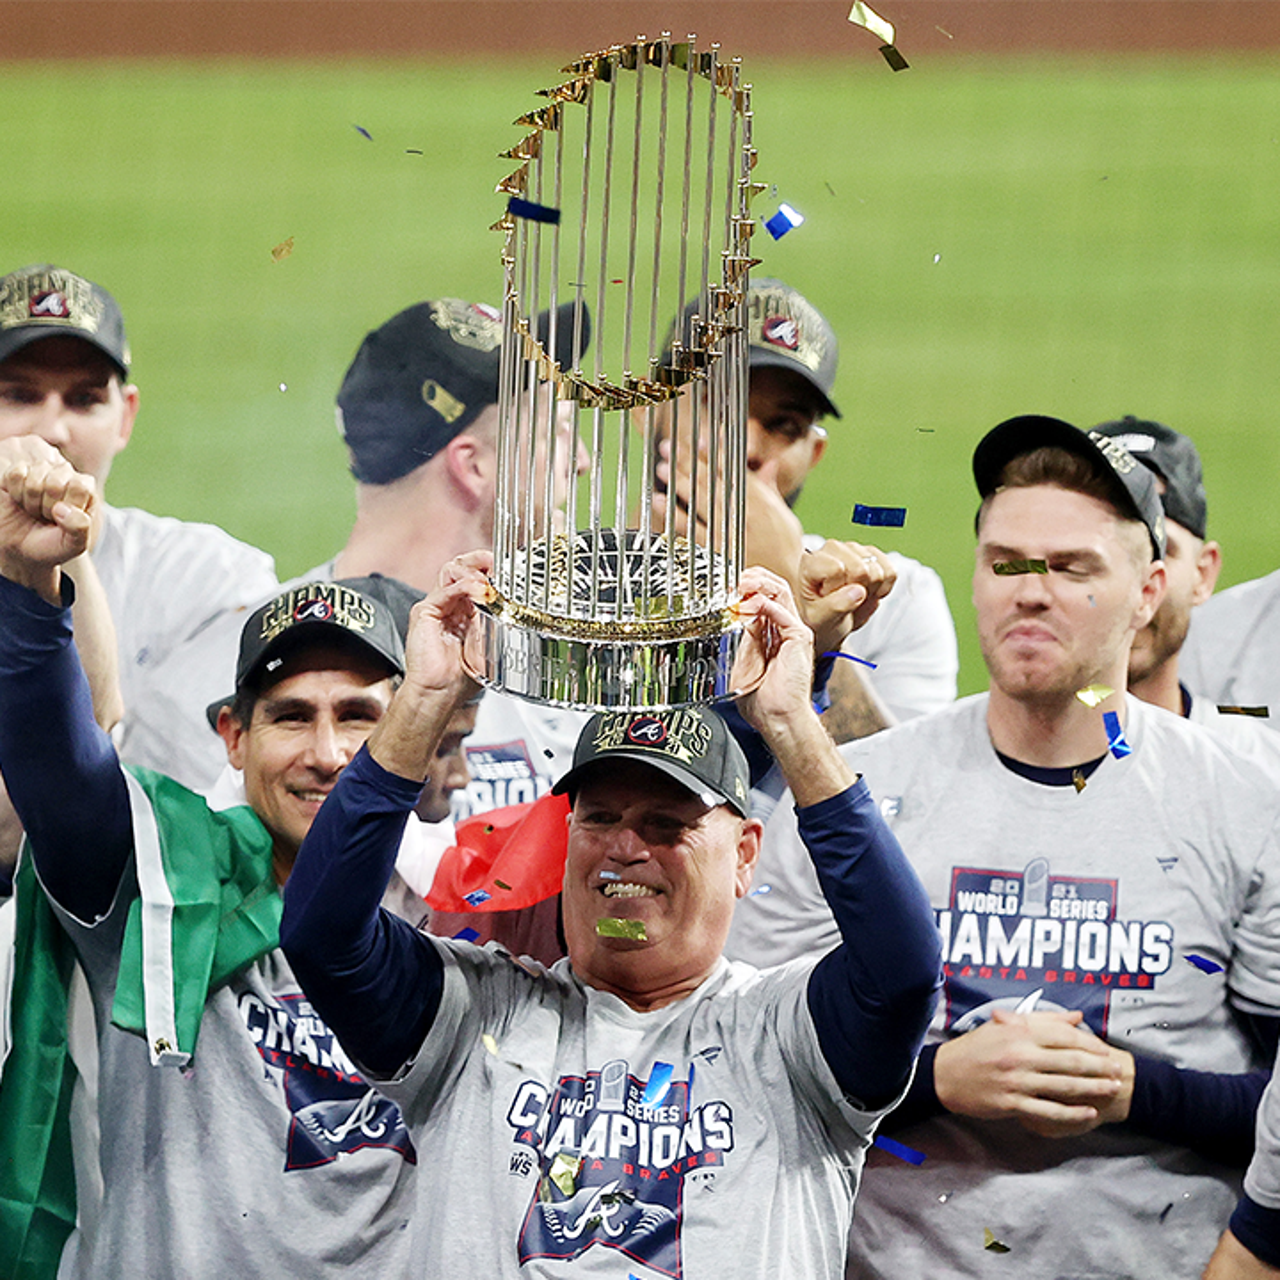 Braves celebrate winning Commissioner's Trophy as World Series